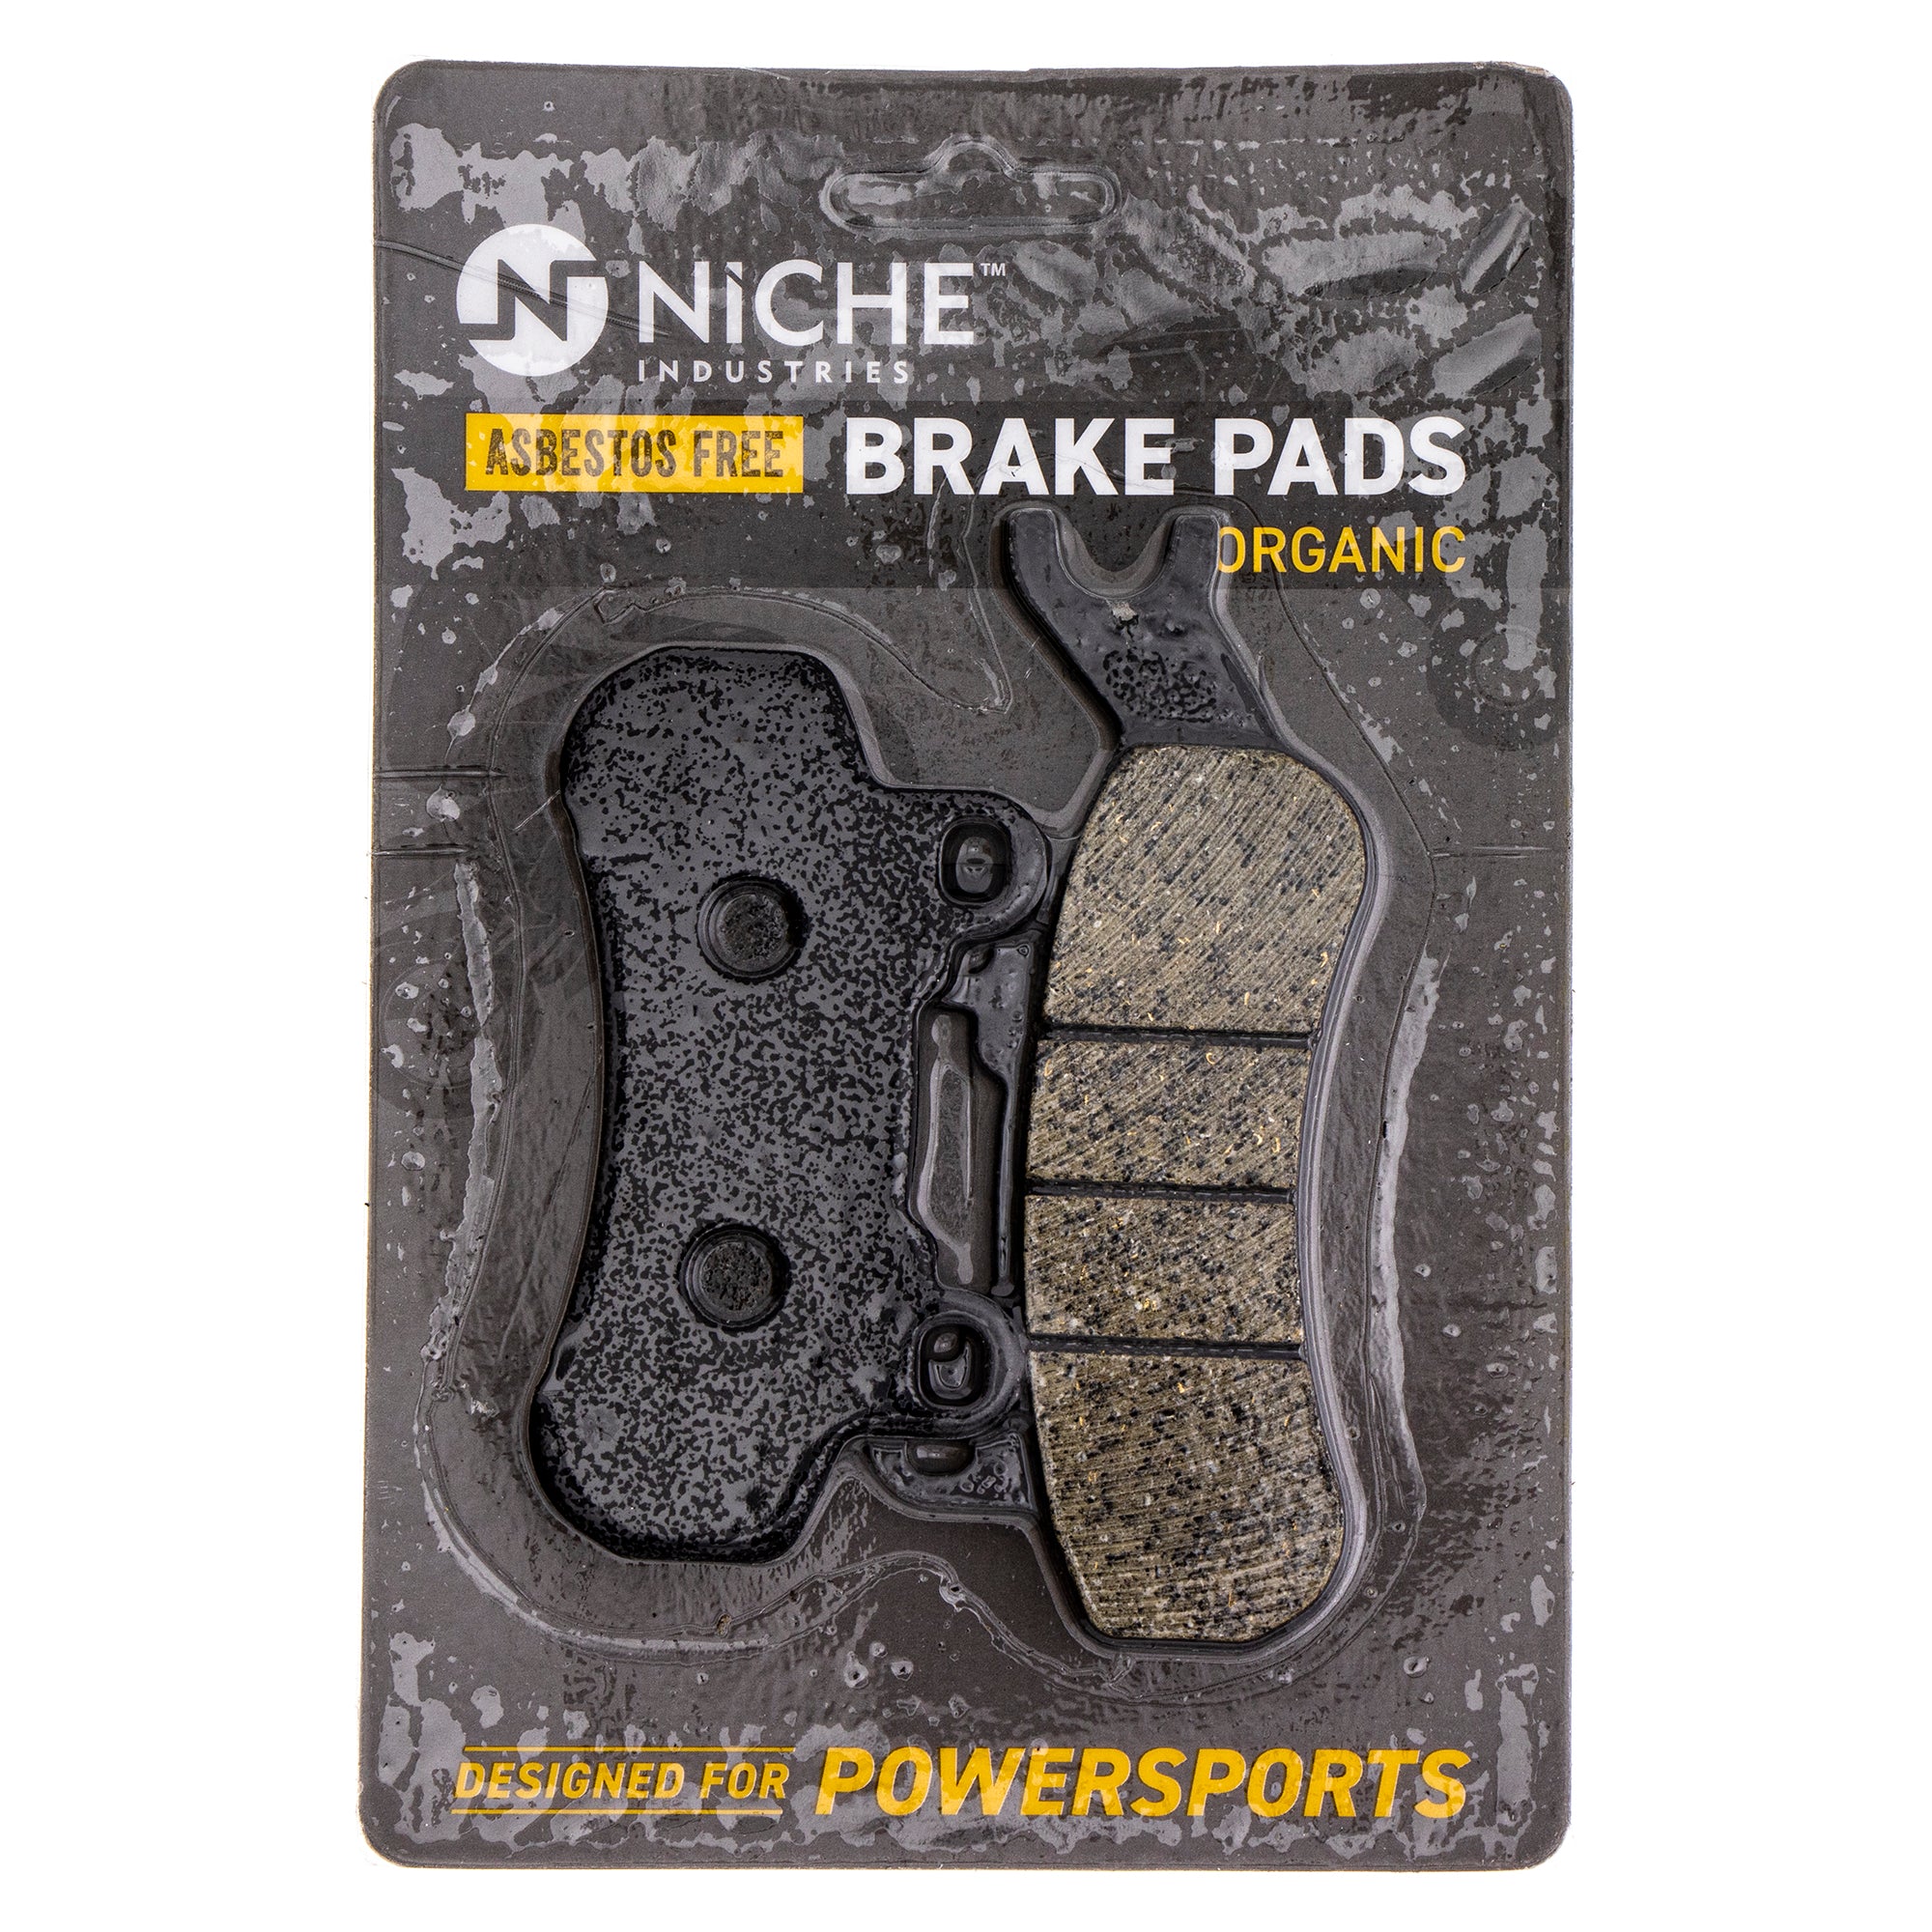 NICHE MK1002418 Brake Pad Kit Front/Rear for BRP Can-Am Ski-Doo